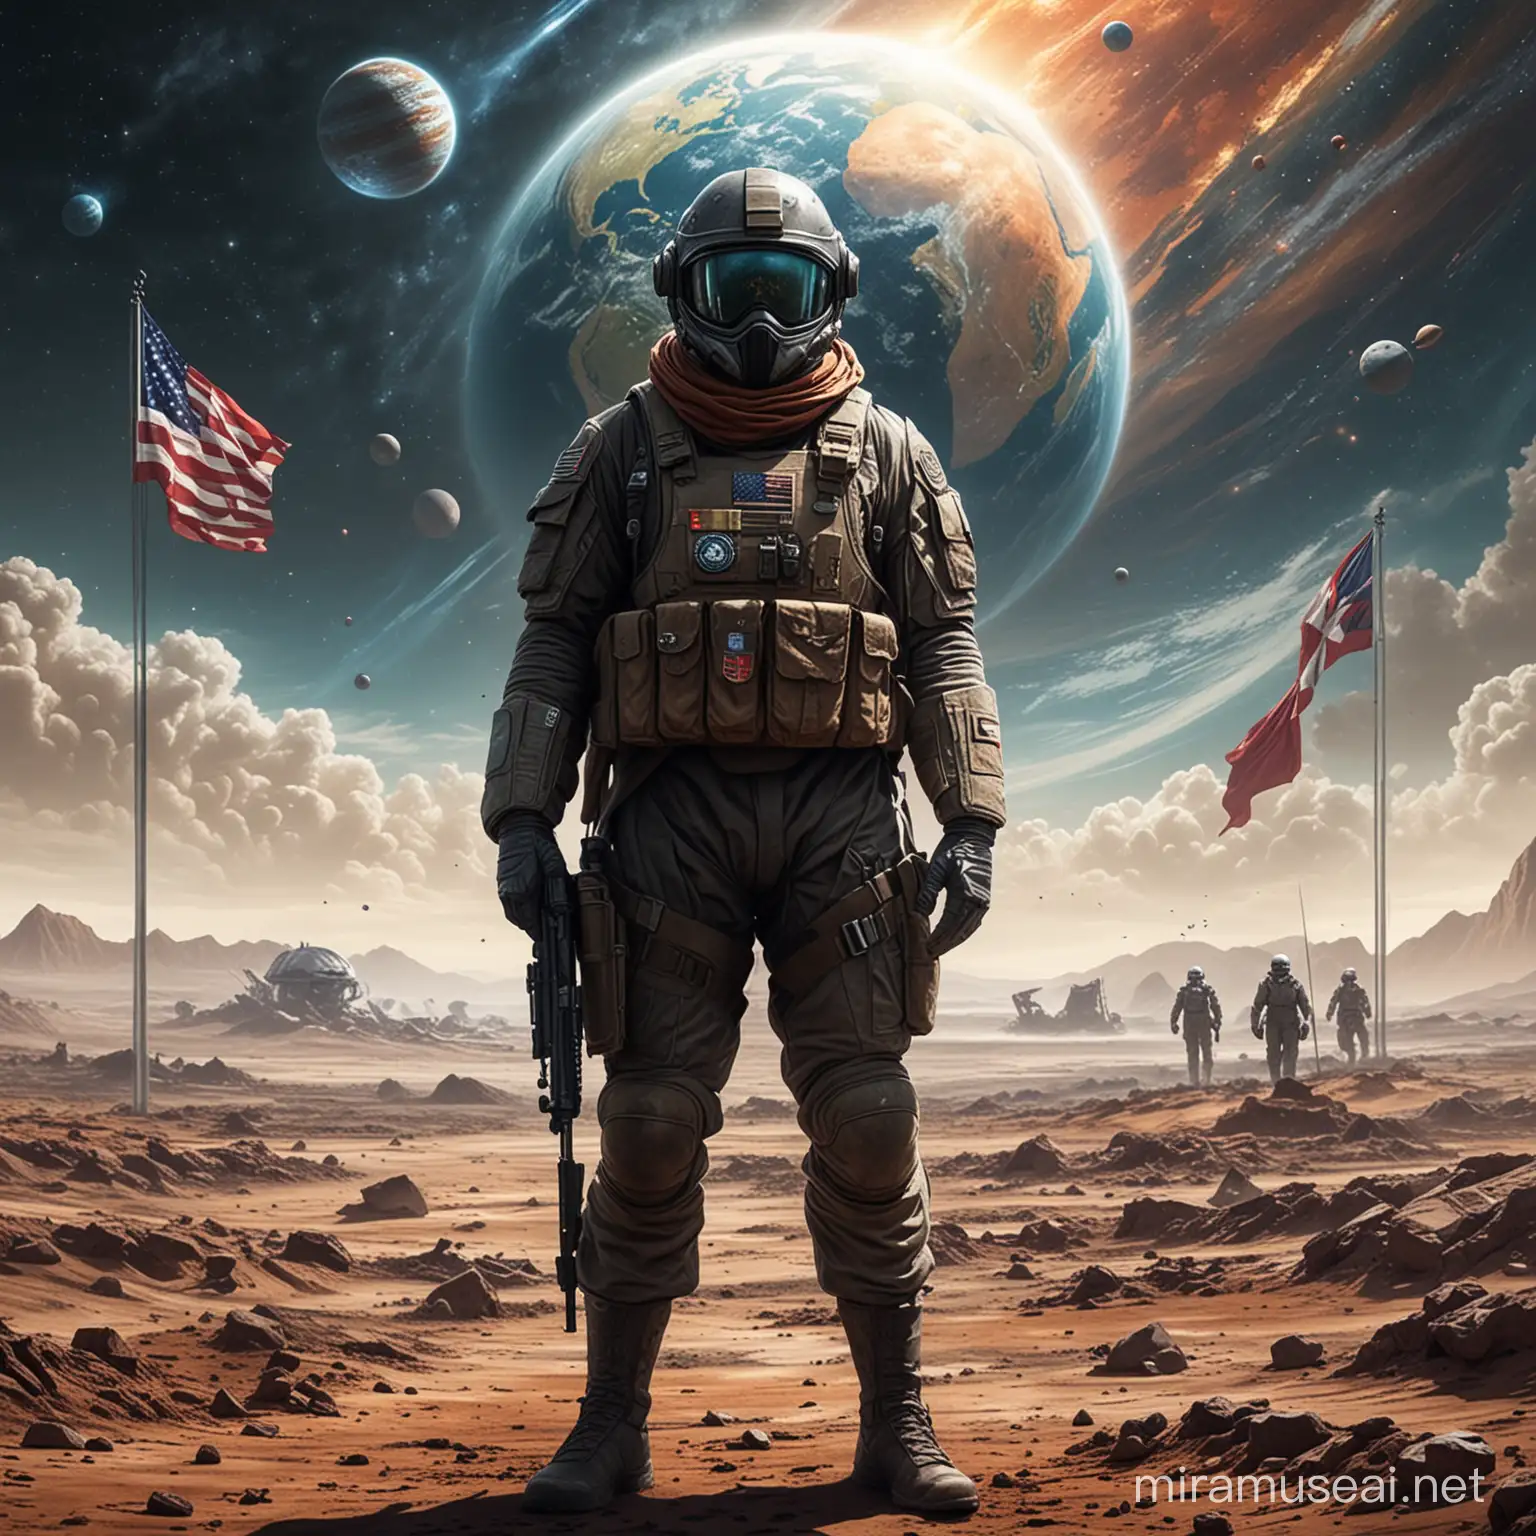 Concept of art work is: Military Space Solider standing over a battle field. The face can be Covered with a helmet. Behind him is a Flag of what can be assumed to be Super Earth or Earth home Planet.